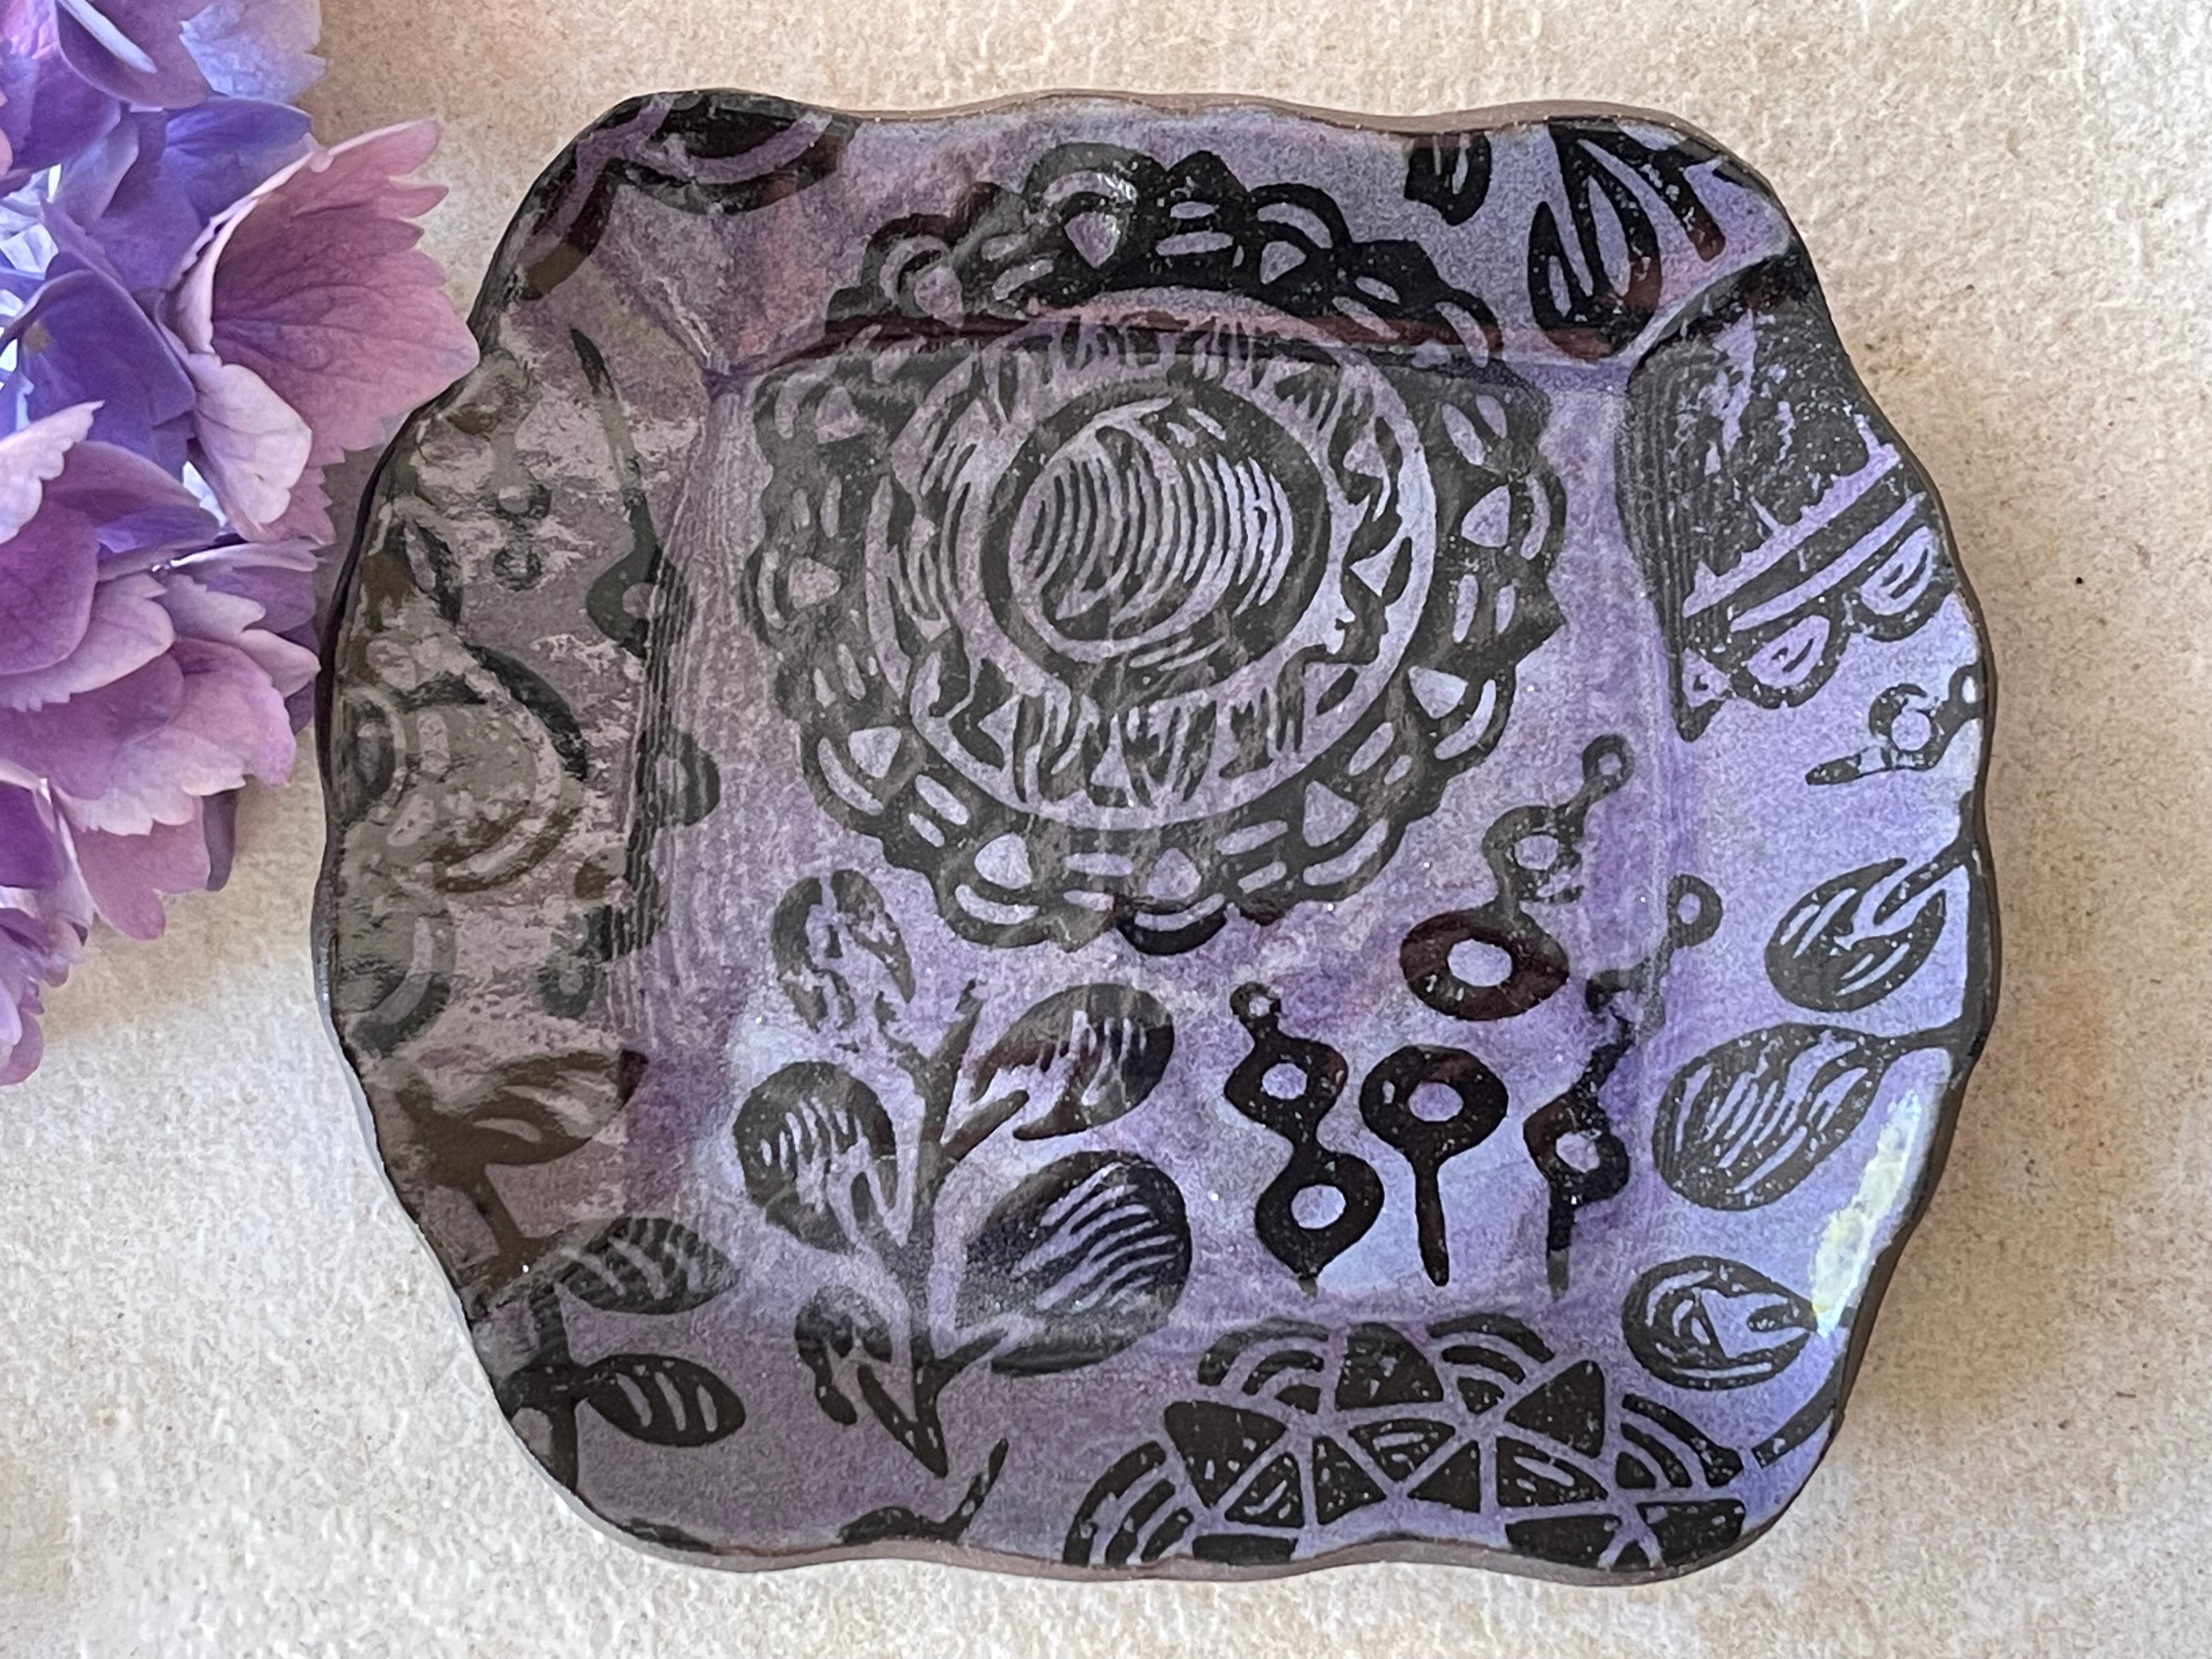 Ring Dish, Jewelry Dish, Catch All Tray, Trinket Bowl, Jewelry Tray, Trinket Tray, Decorative Dish, Purple Plate, Bread Plate